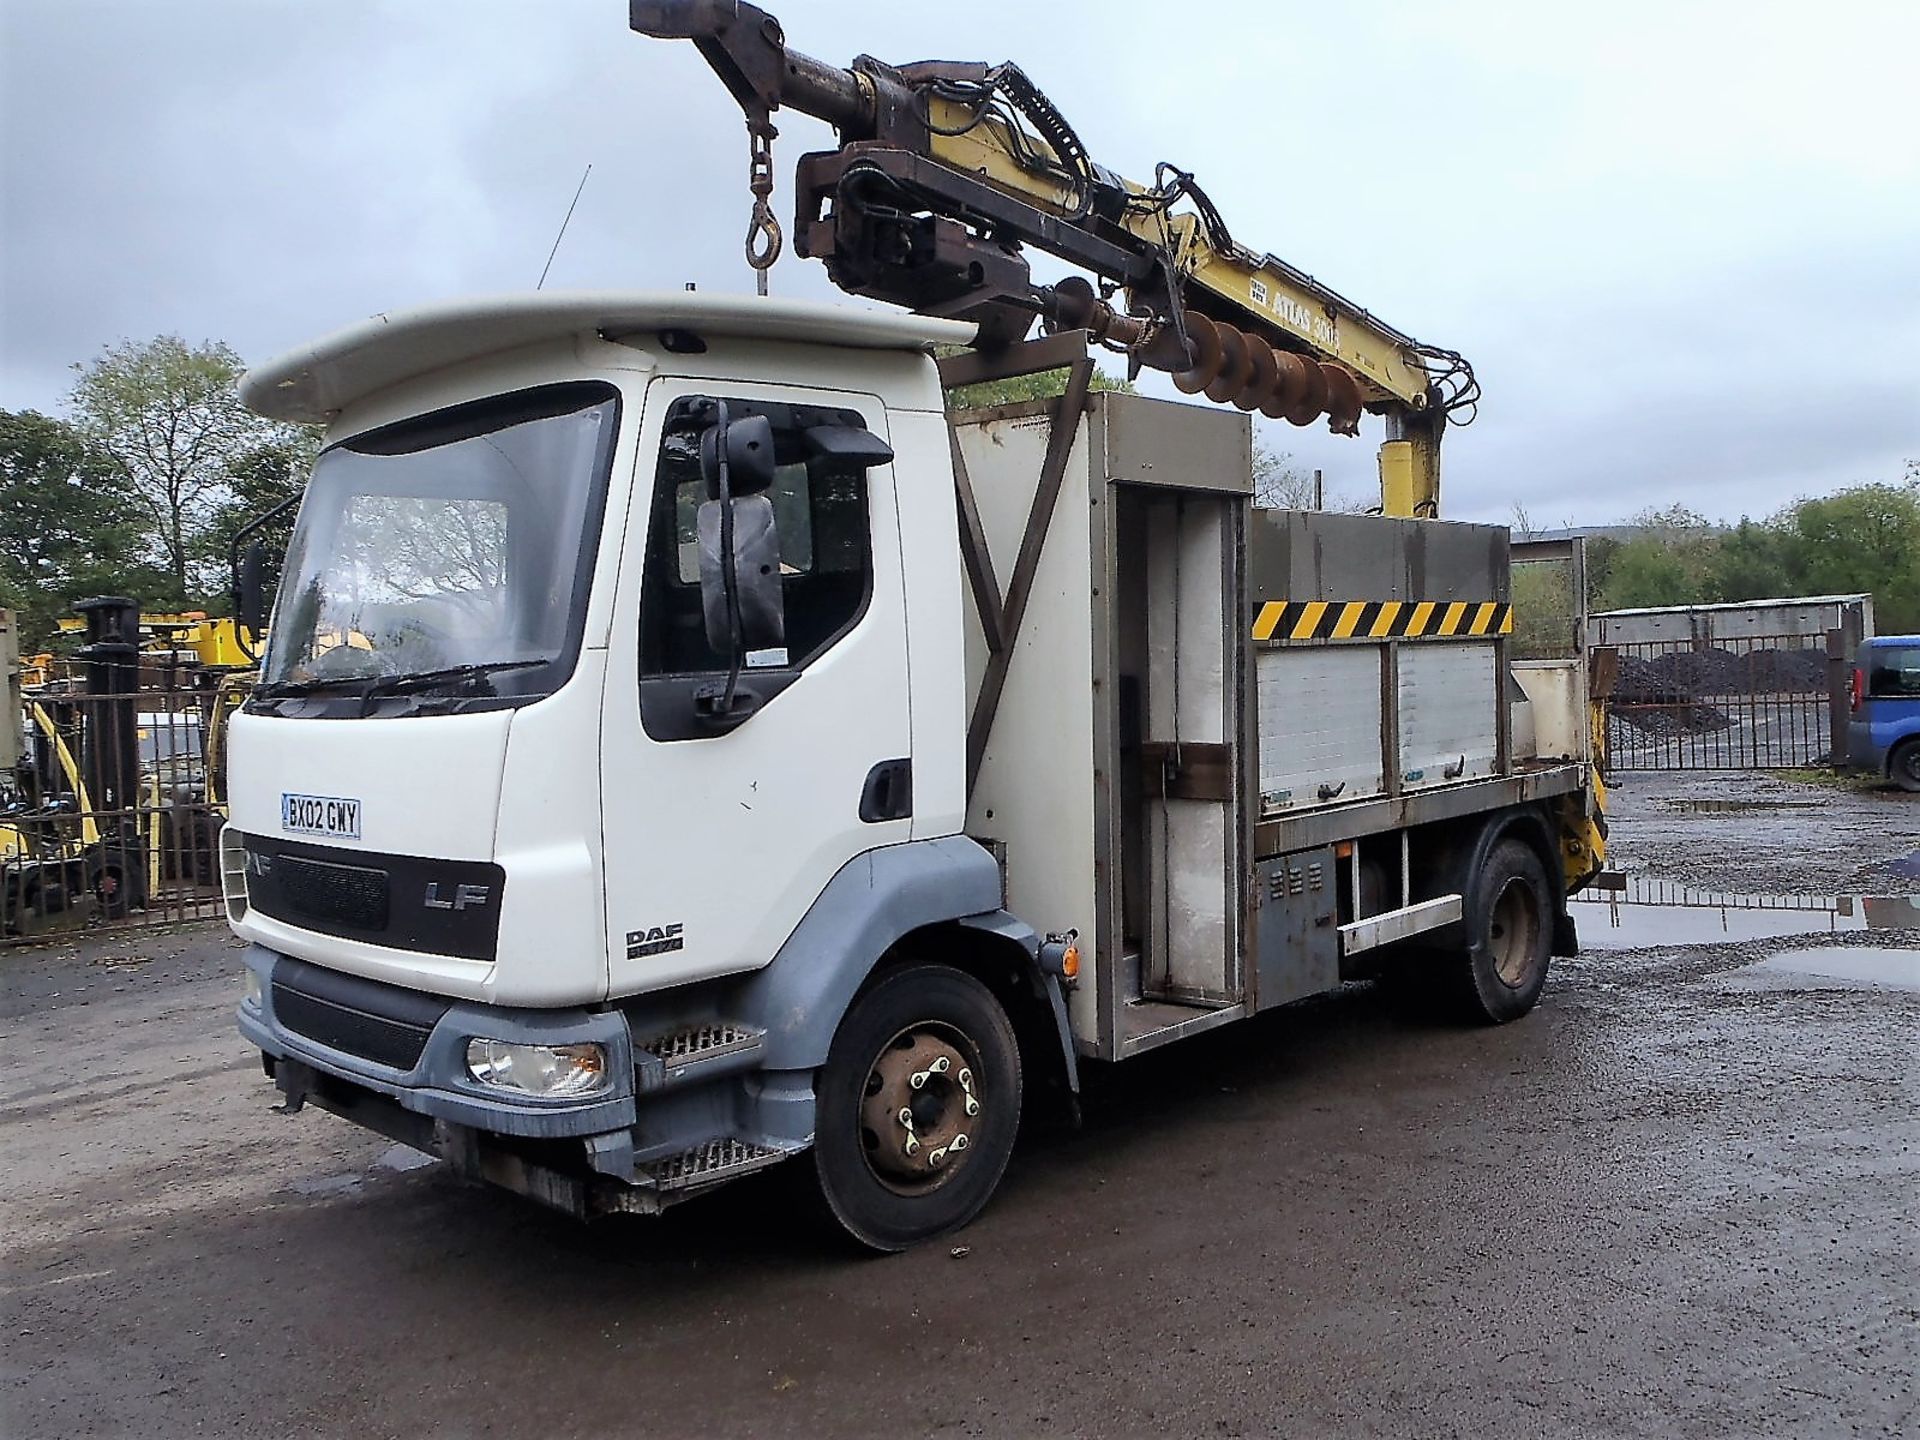 DAF FA LF55.170 13 tonne flat bed pole erection lorry Registration Number: BX02 GWY Date of